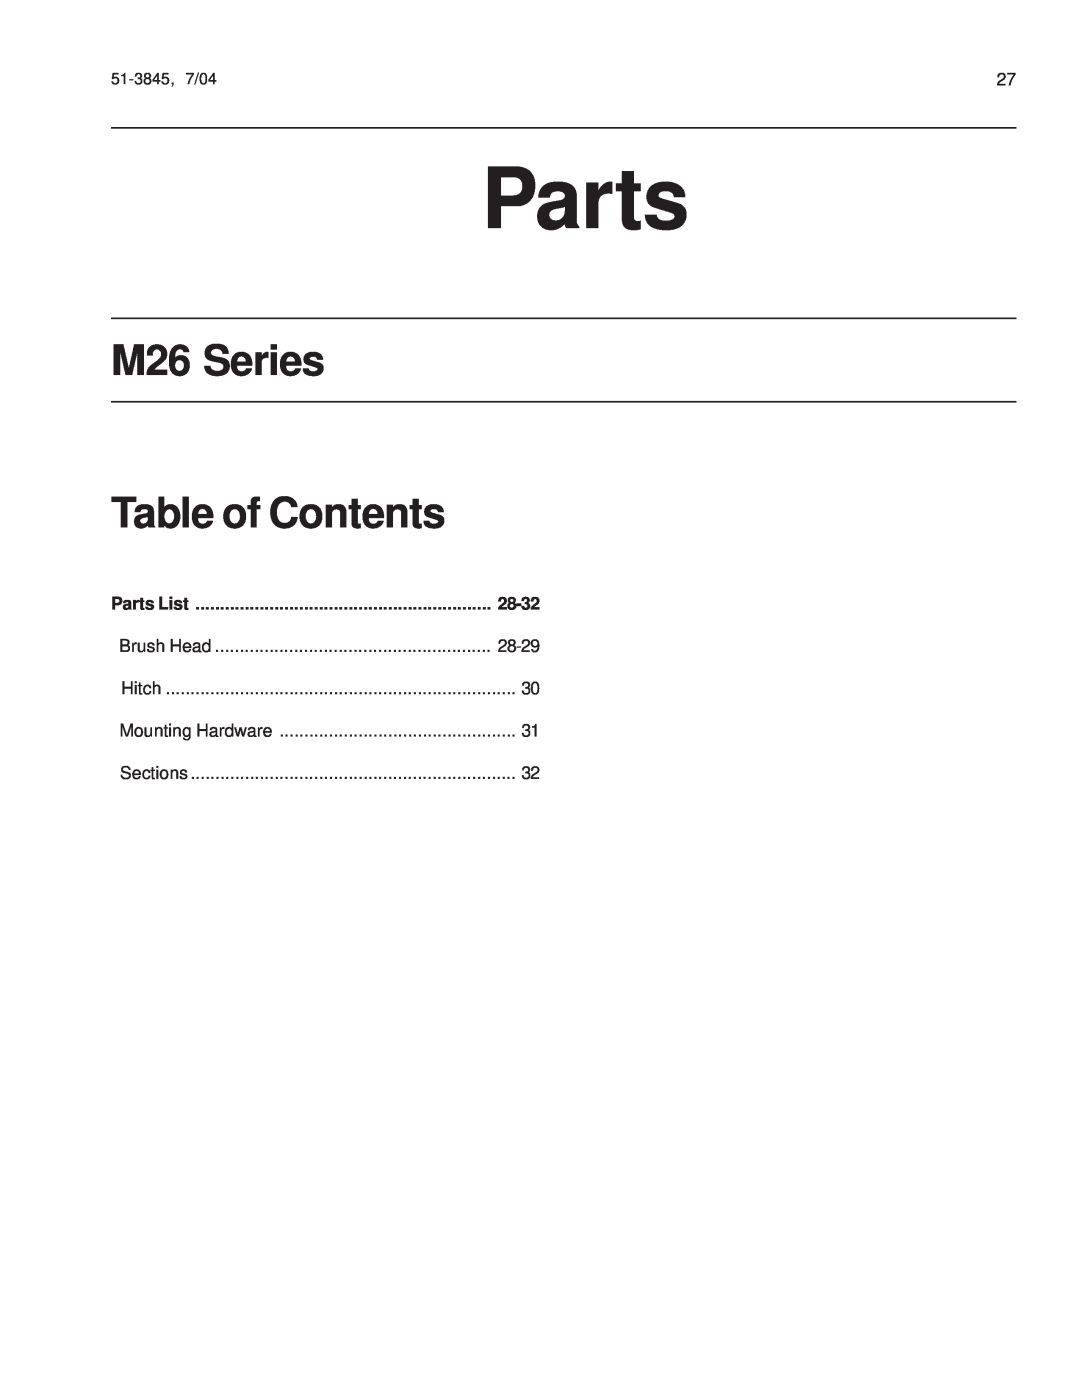 Snapper 151-3845 manual 28-32, M26 Series, Table of Contents, Parts List 